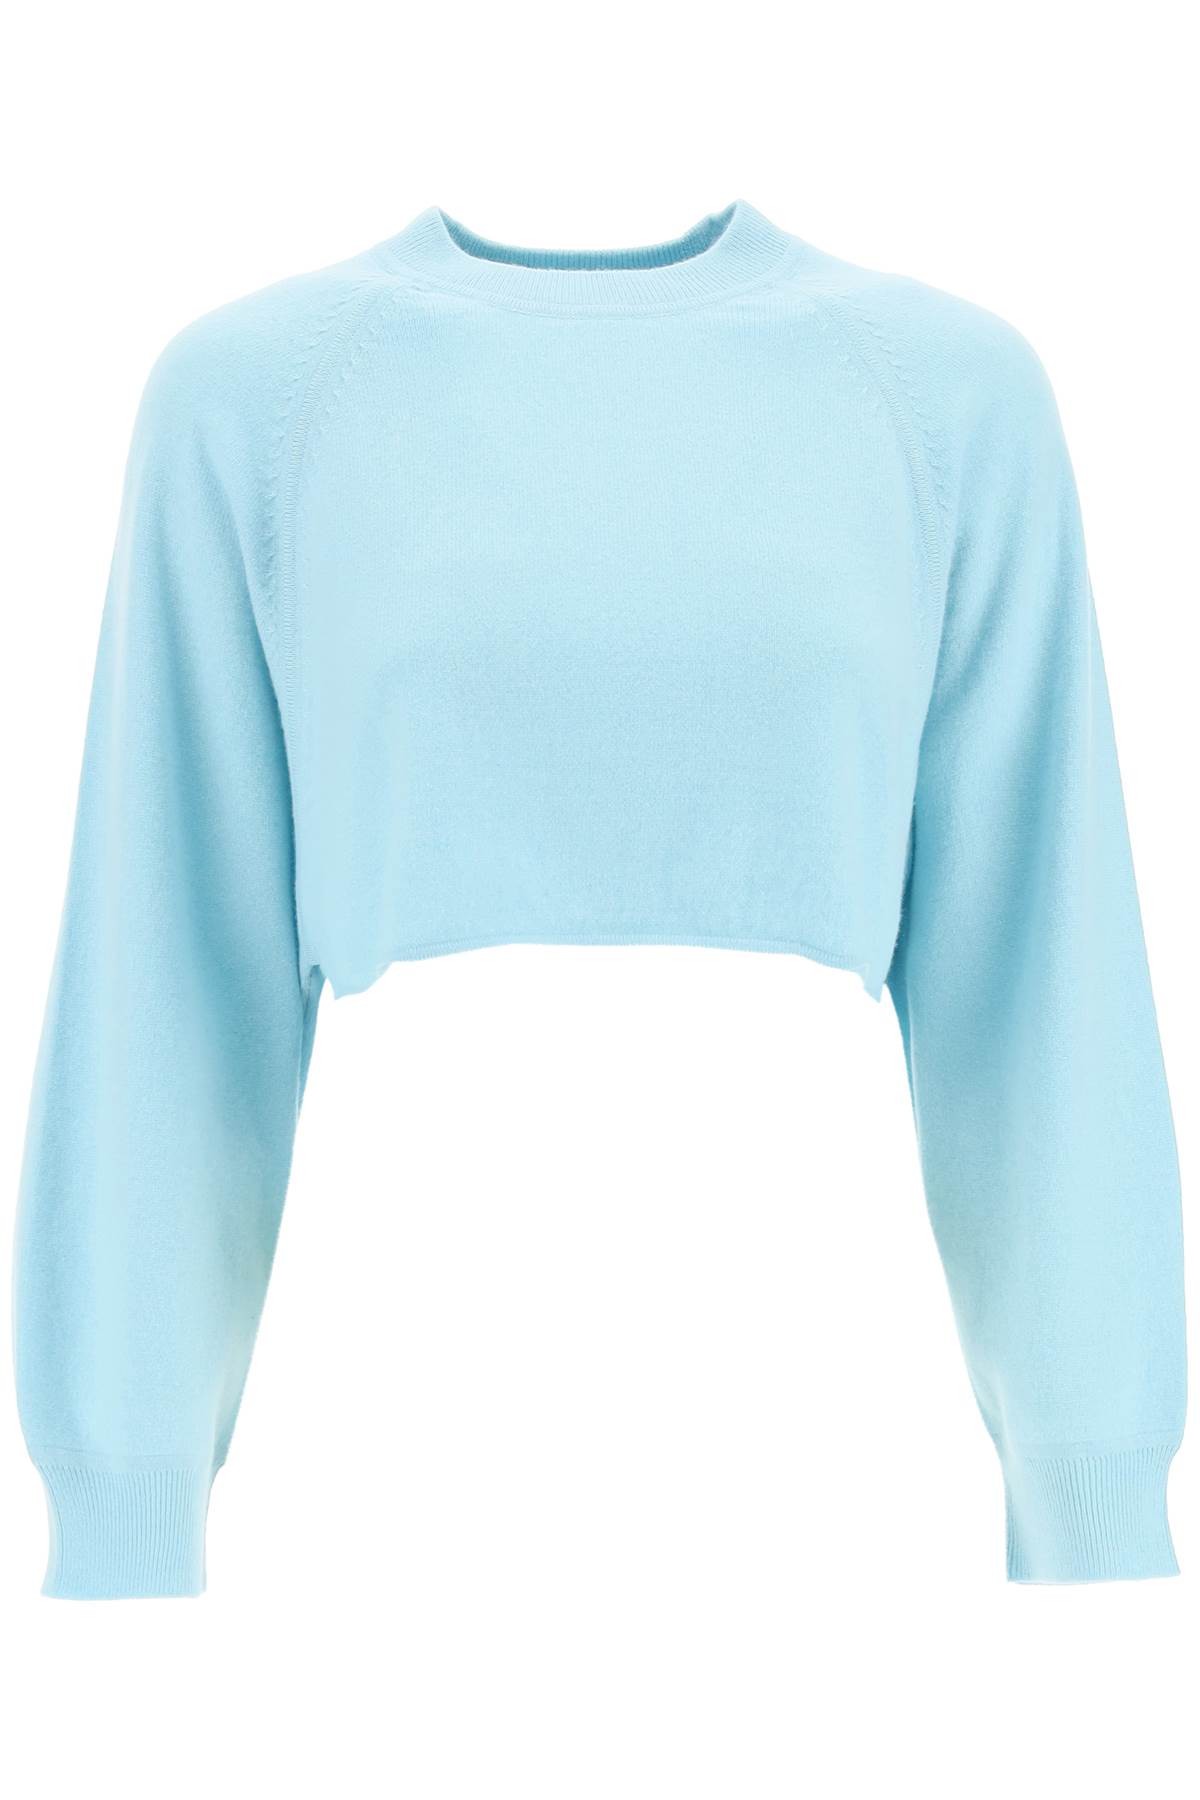 LOULOU STUDIO BOCAS CASHMERE CROPPED SWEATER